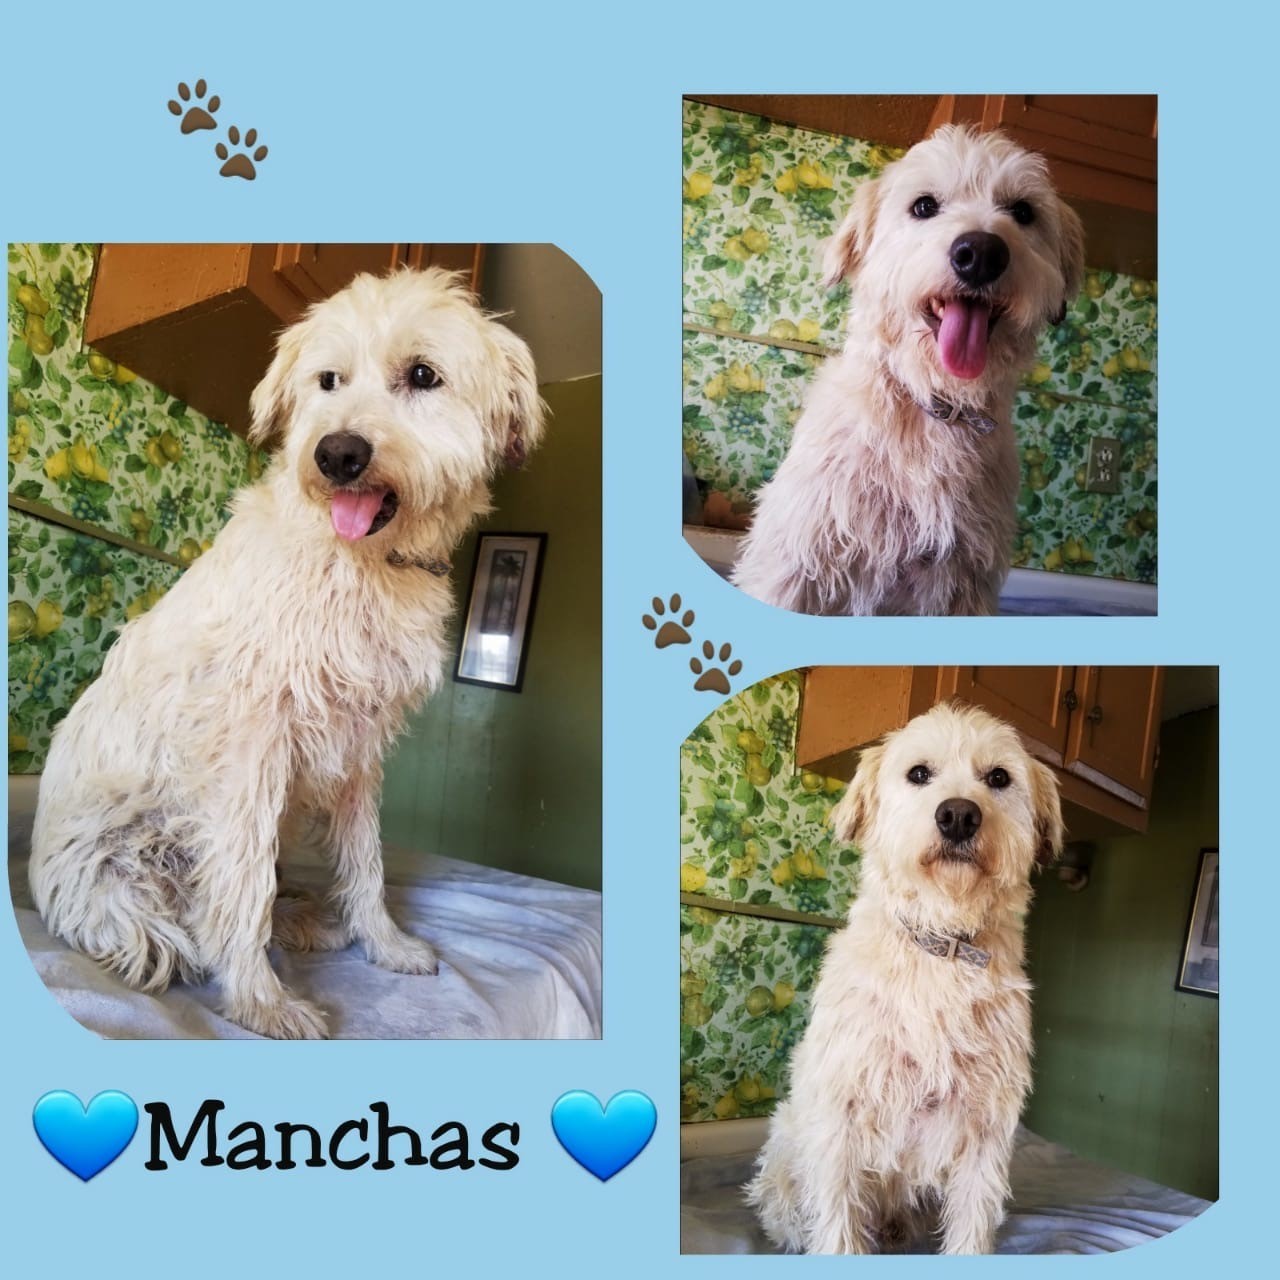 Manchas detail page